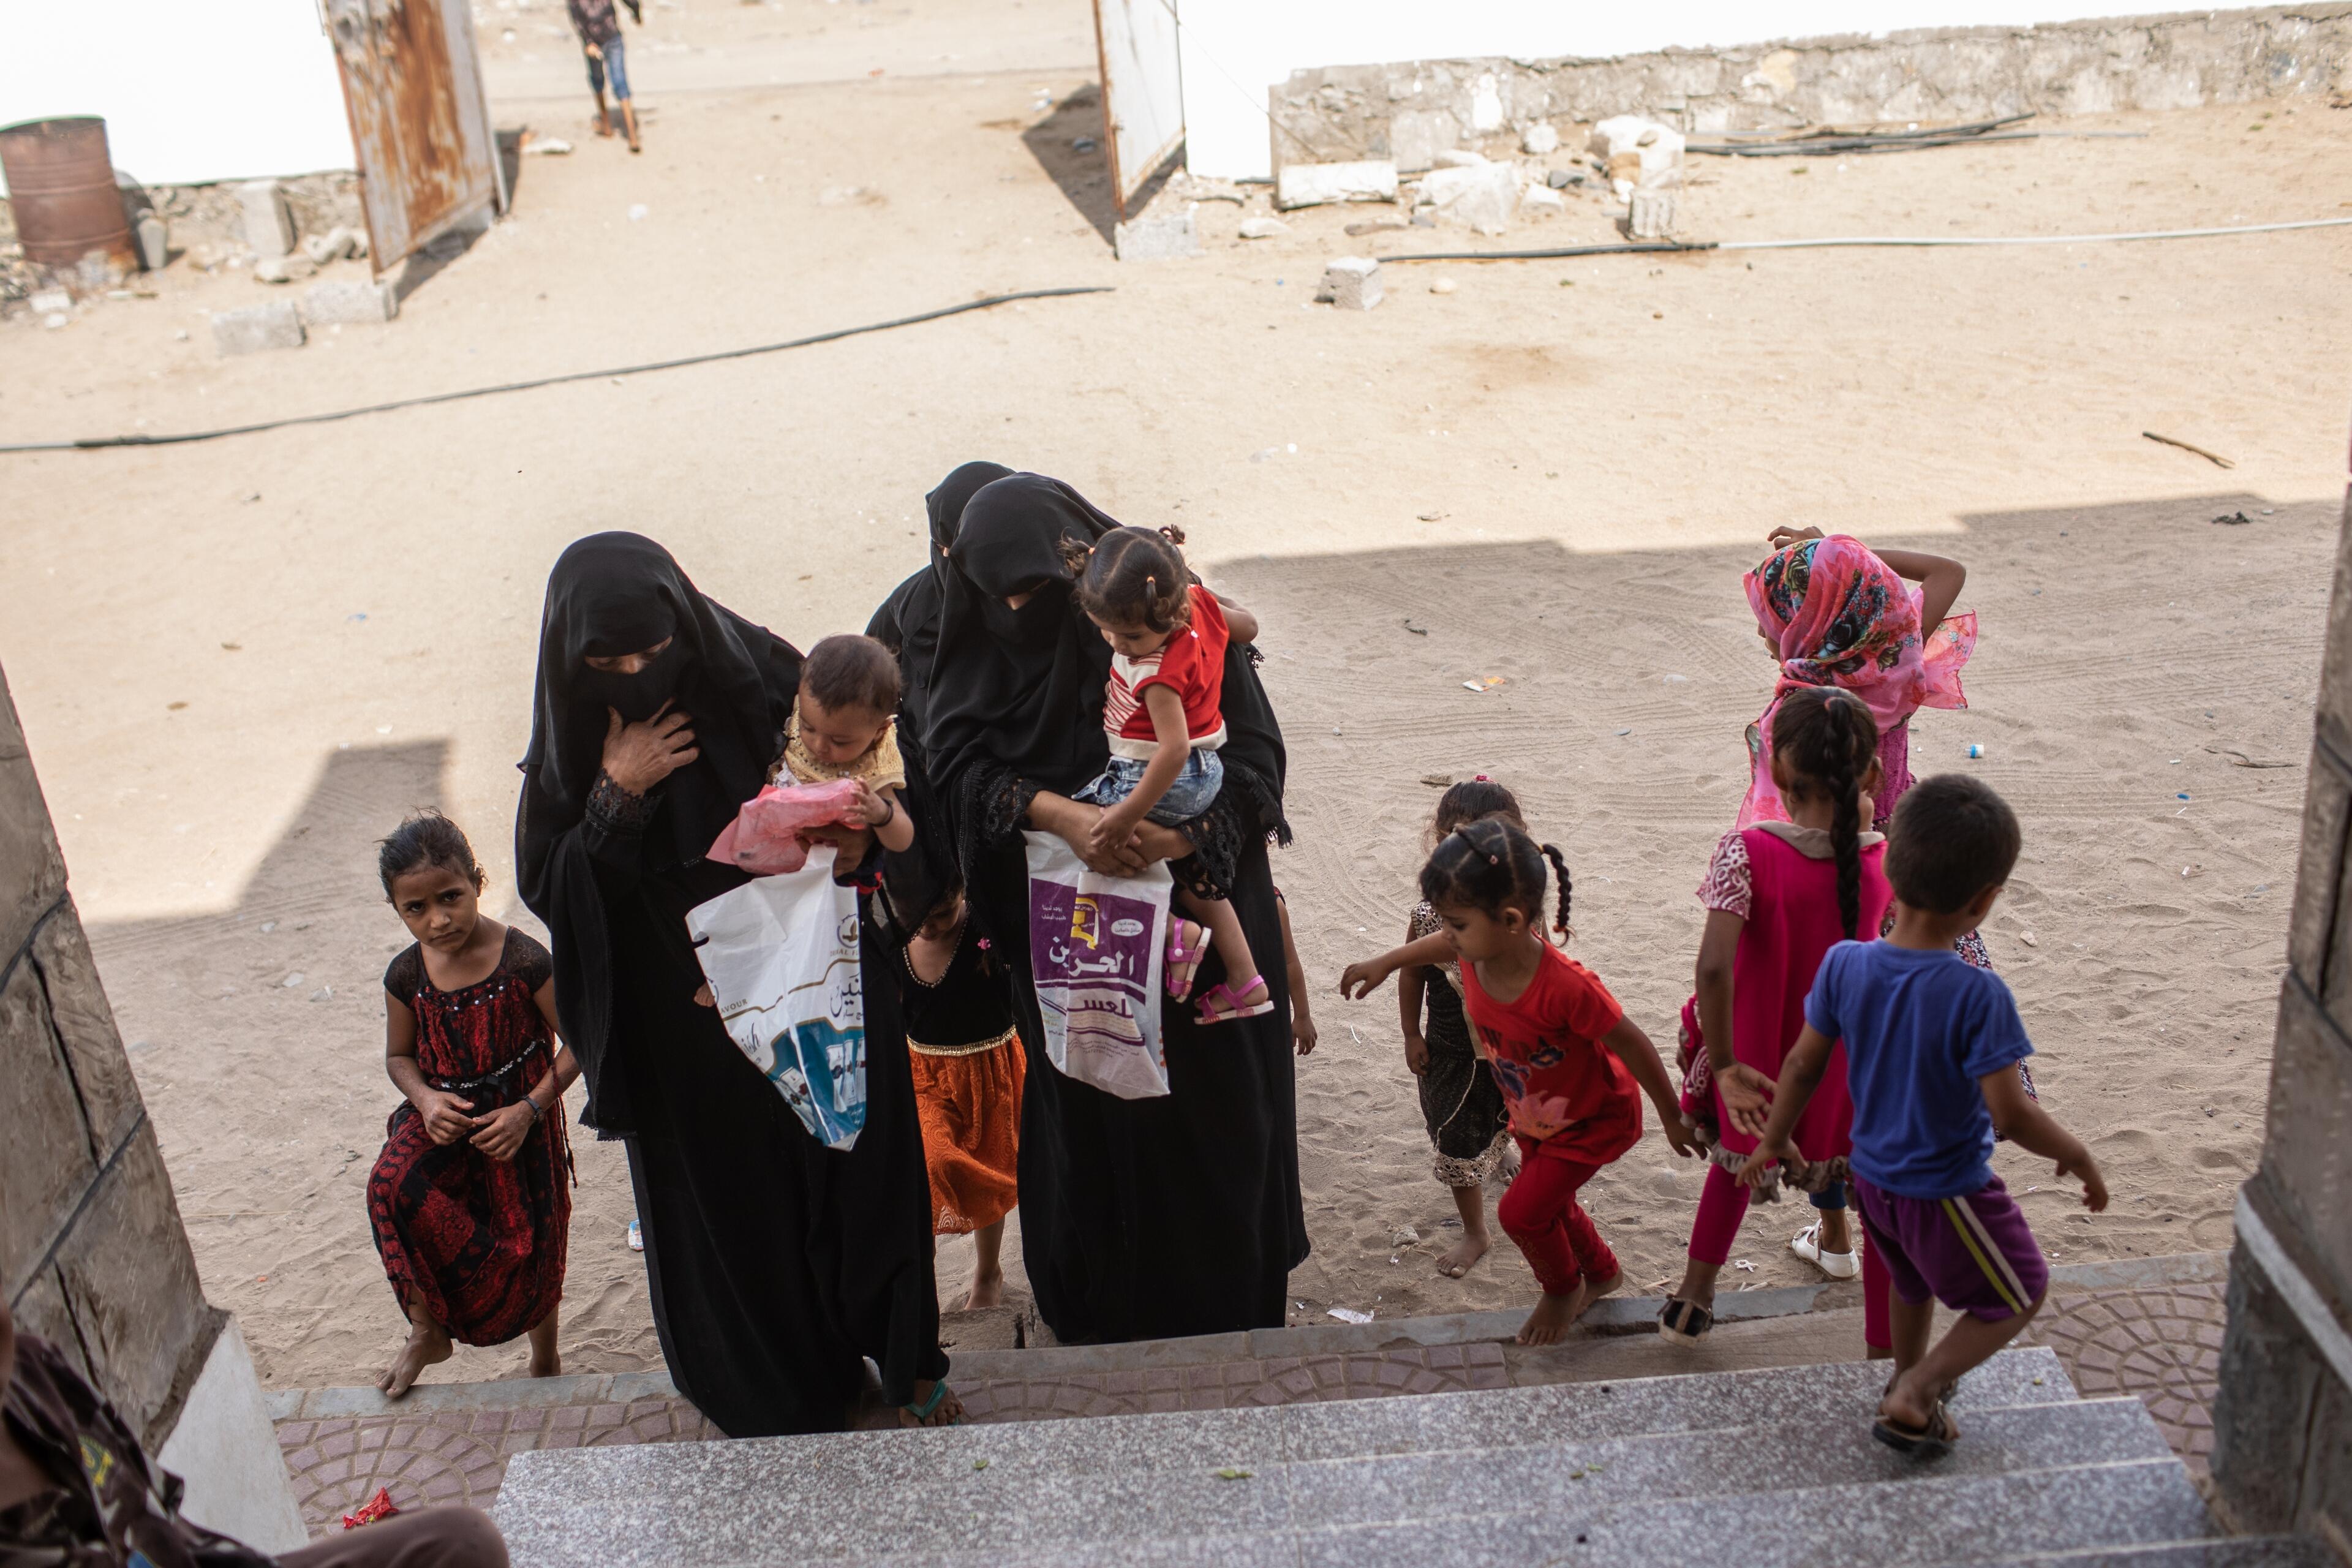 A group of mothers and children arrive at the steps of an International Rescue Committee center near Aden, Yemen